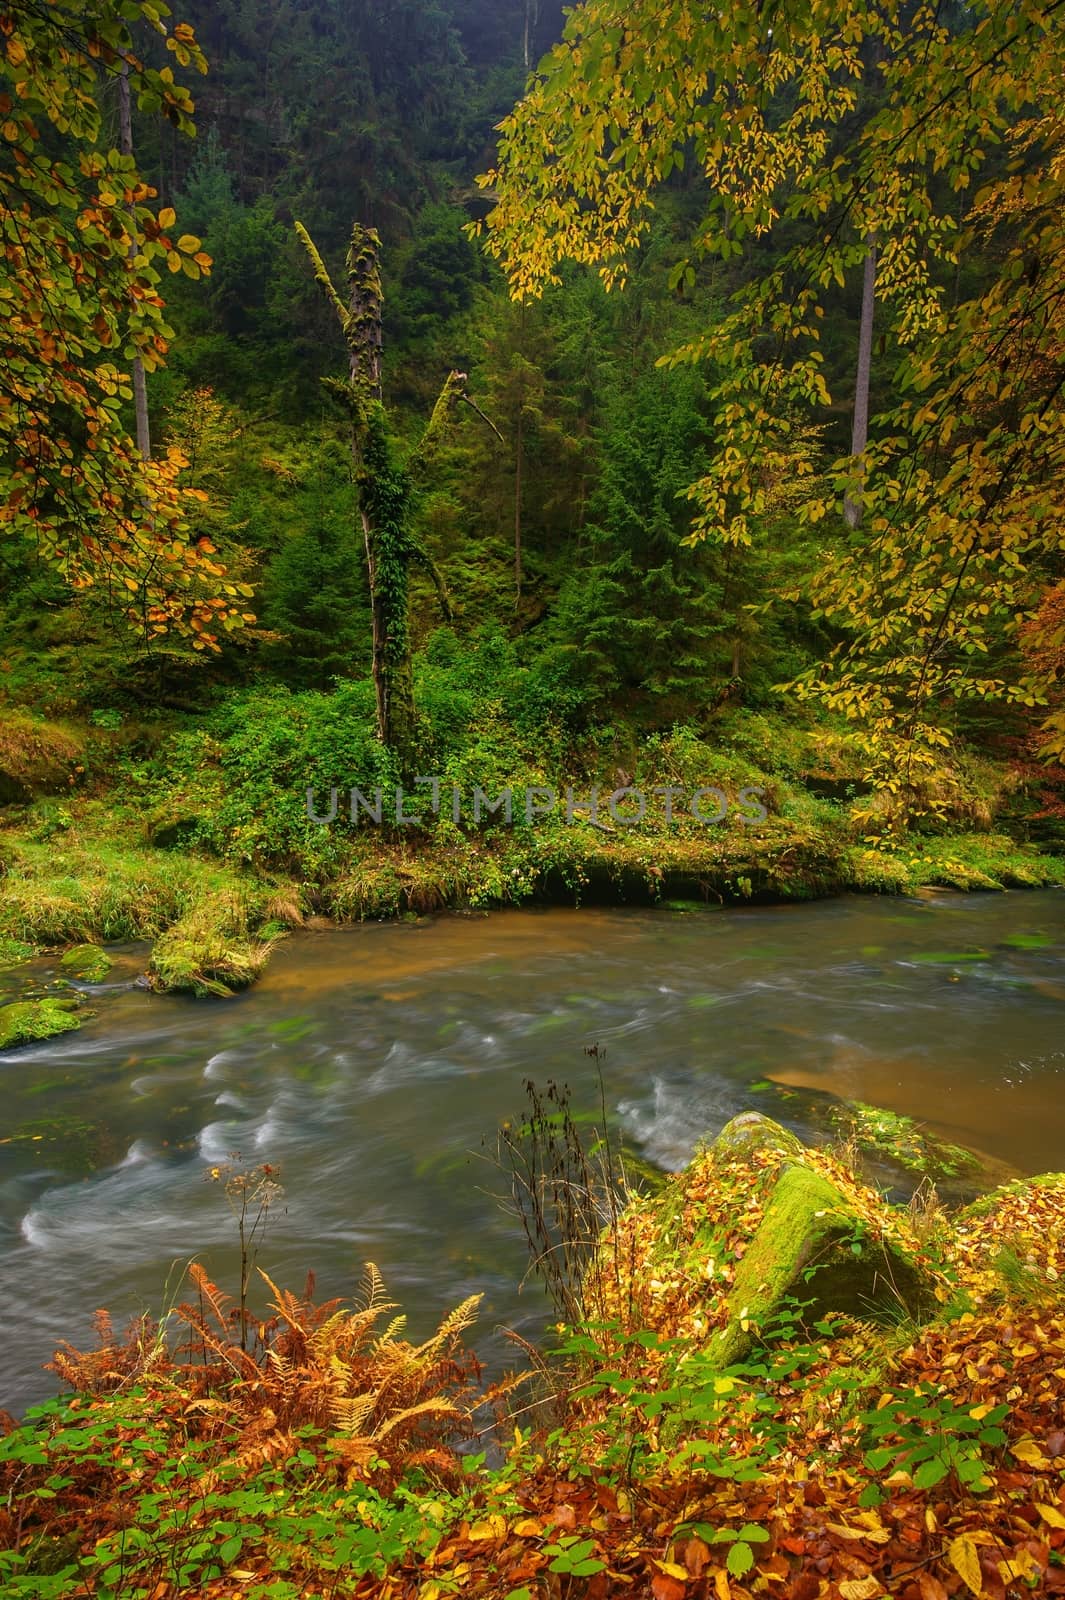 A beautifully clean river flowing through a colorful autumn forest